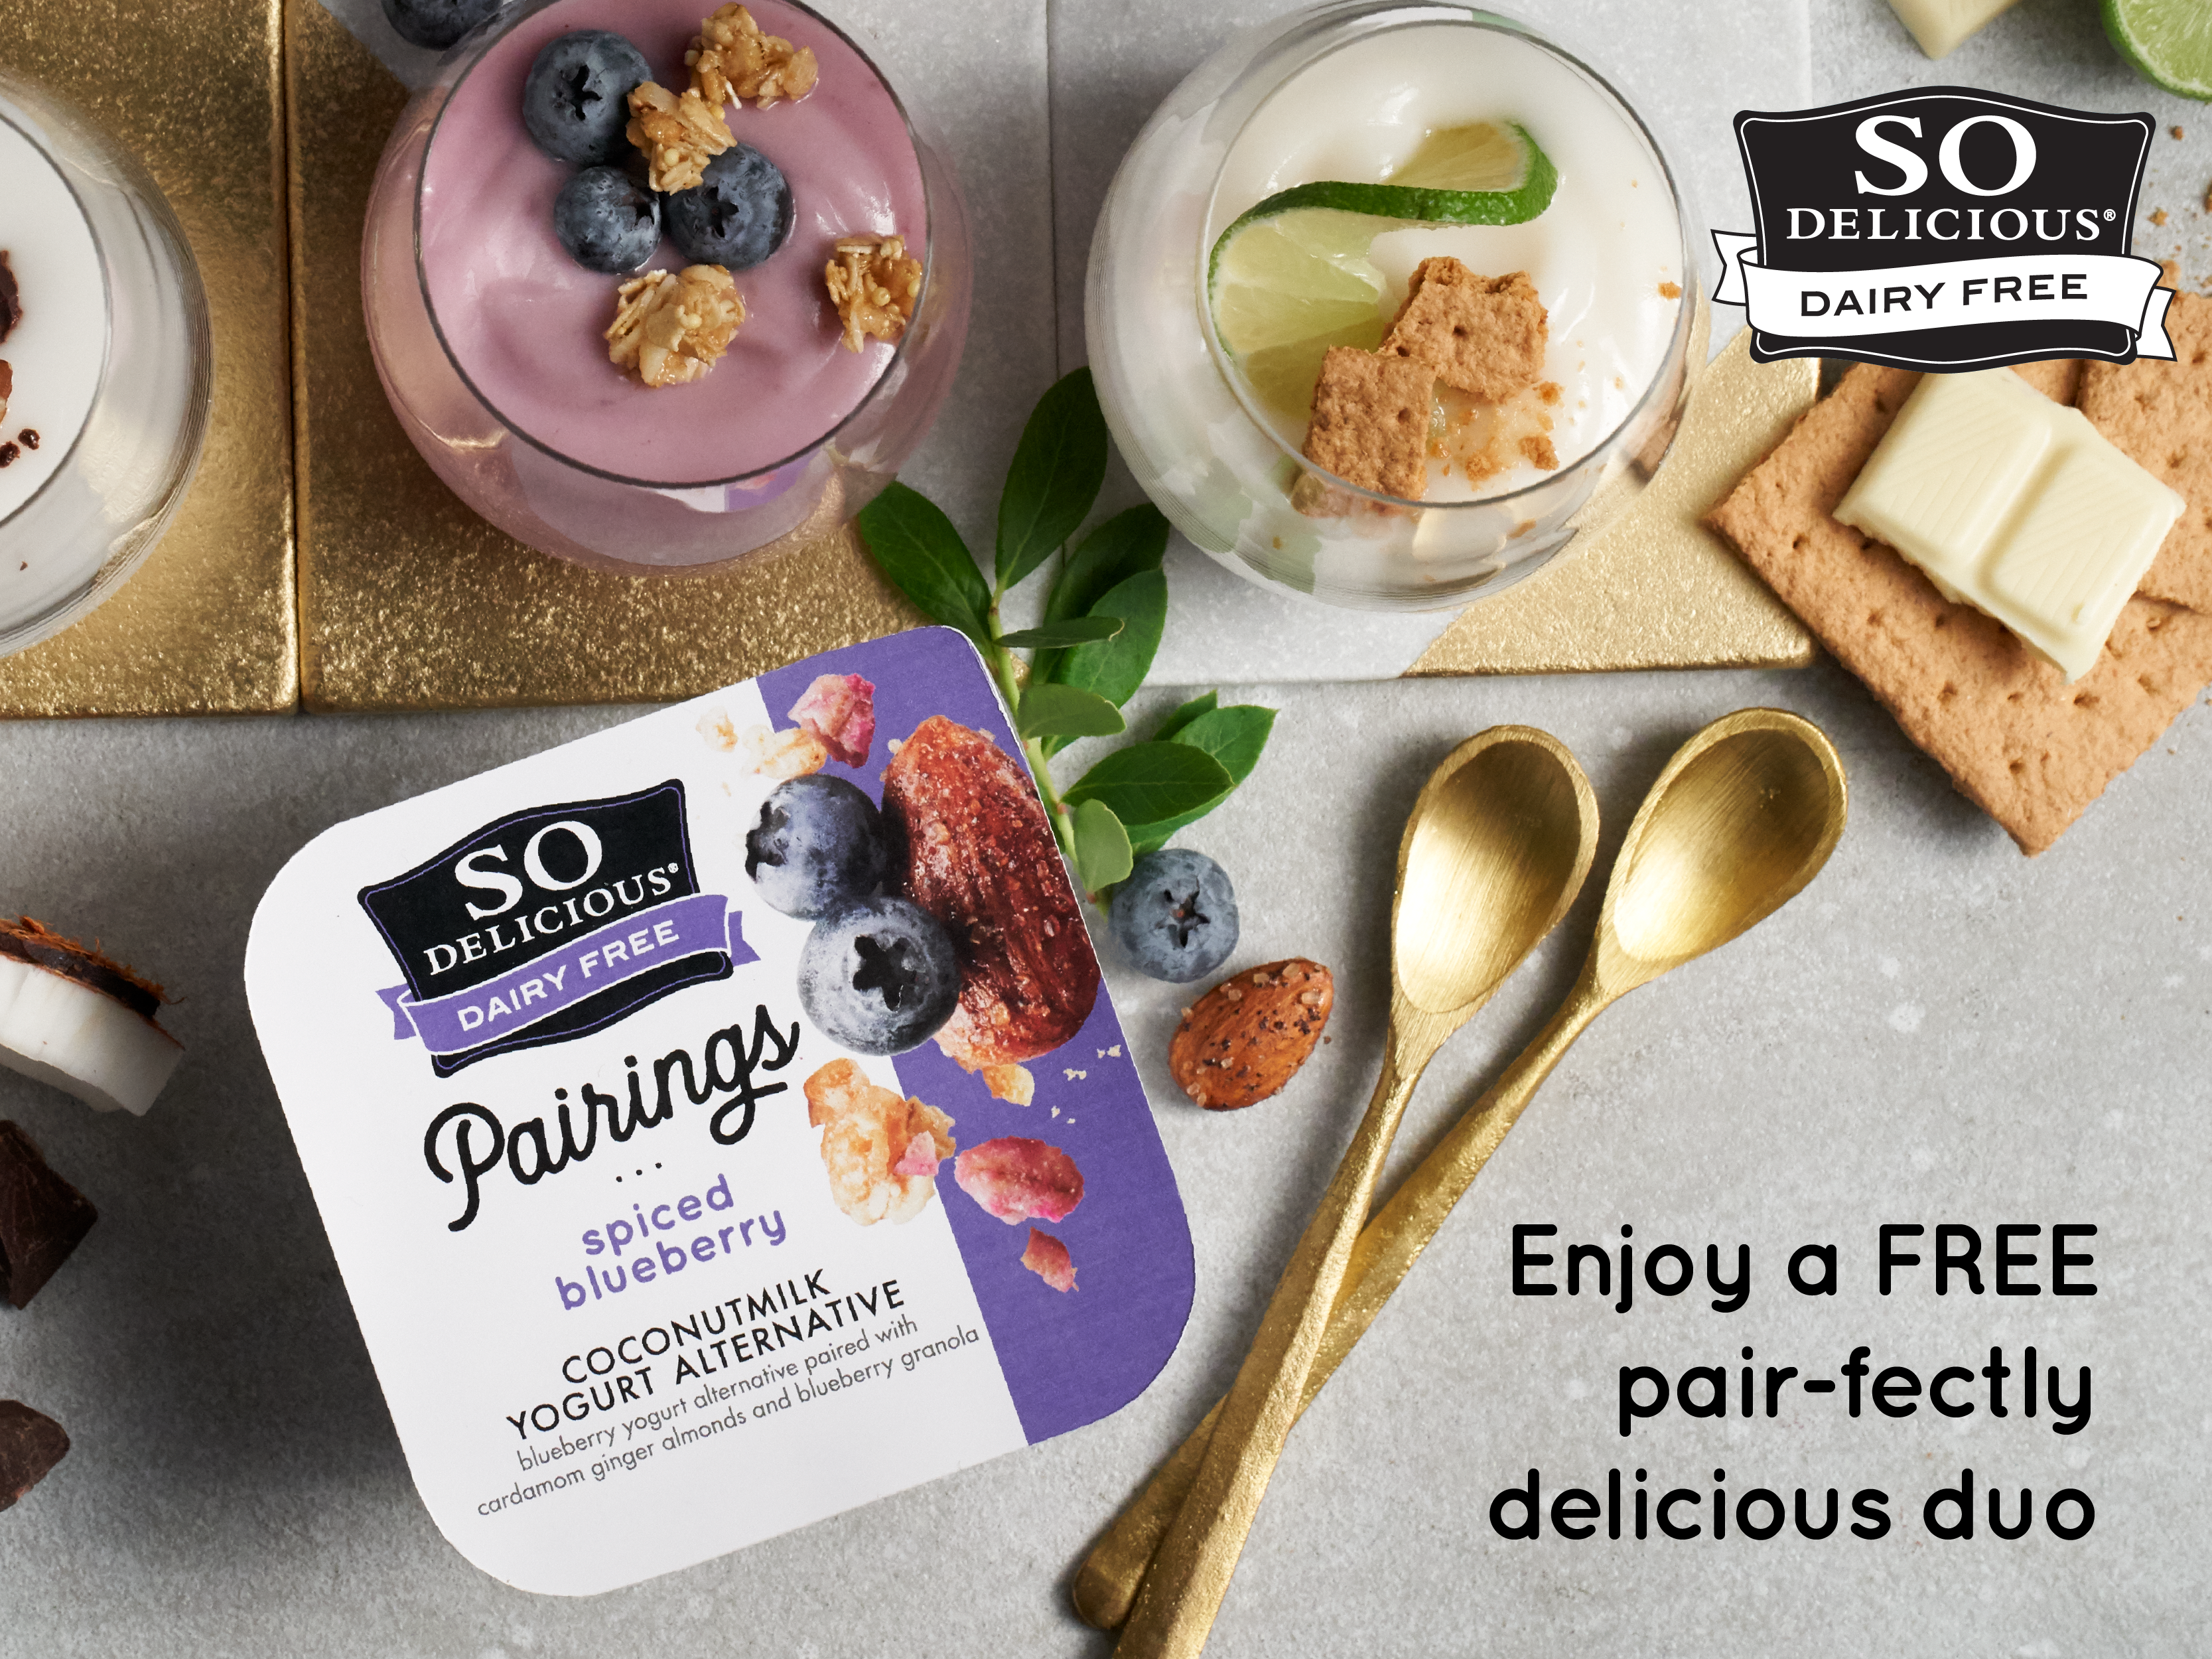 FREE So Delicious Pairings At Publix on I Heart Publix